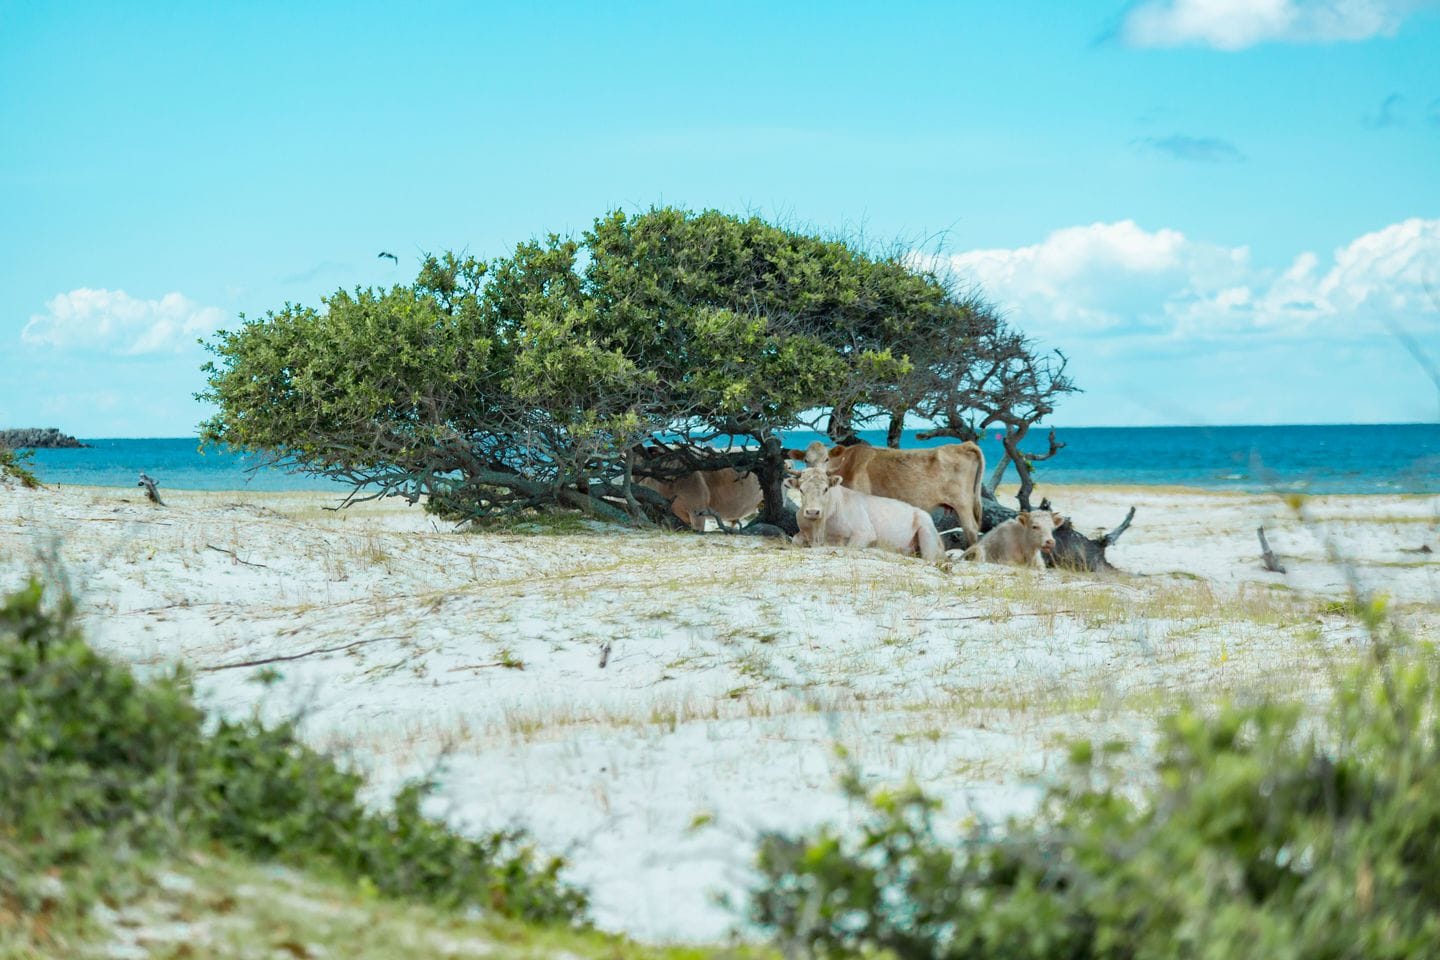 Wild cows lounge on North Carolina’s Cedar Island in May 2019. On 6 September 2019, Hurricane Dorian blasted the island with Category 1 force winds and rain, creating what locals described as a “mini tsunami”. The low-lying marshlands were soon inundated with an estimated eight feet of water, and the cows were swept out to sea by the storm surge. They got lucky when they washed up at Cape Lookout National Seashore. Photo: Paula O'Malley Photography